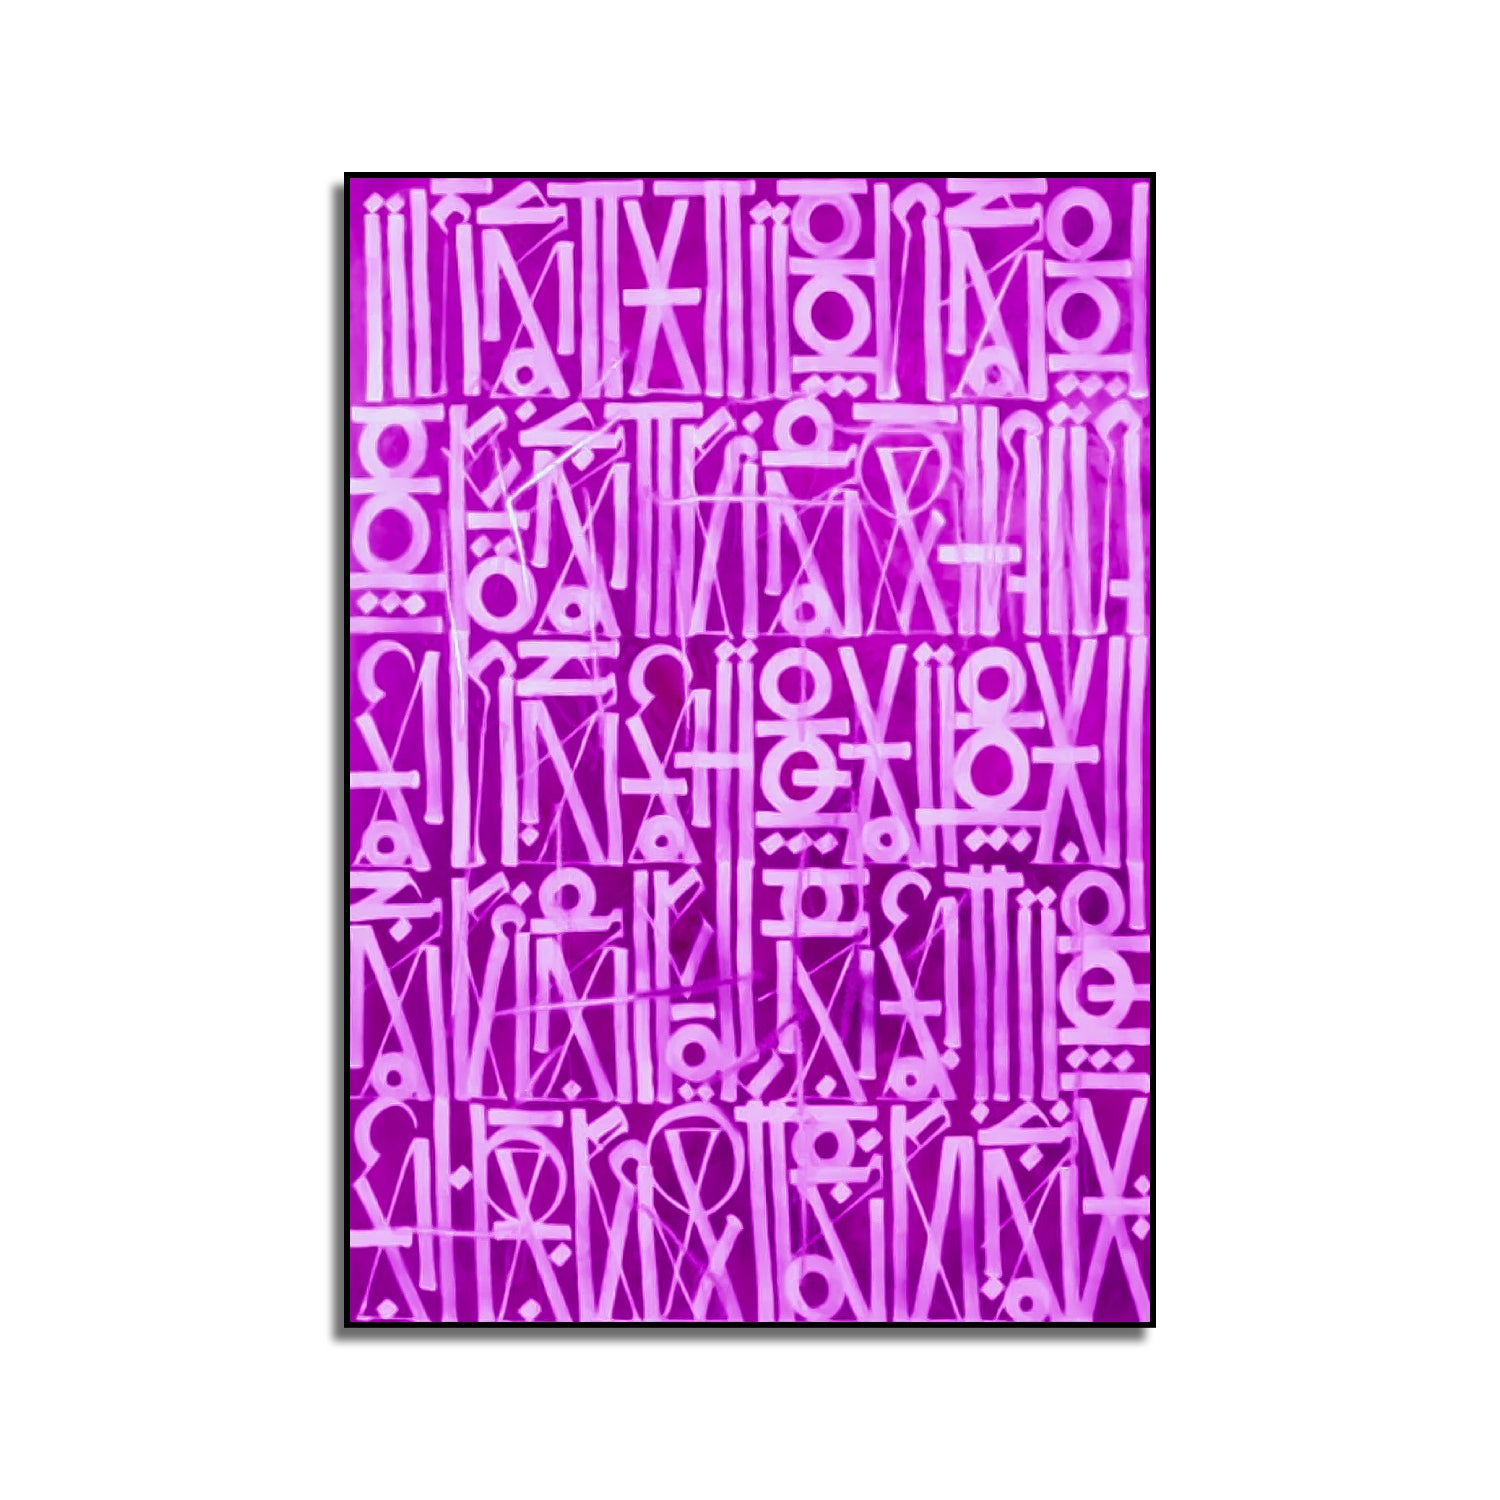 Retna-Inspired Purple Calligraphic Fonts Wall Painting